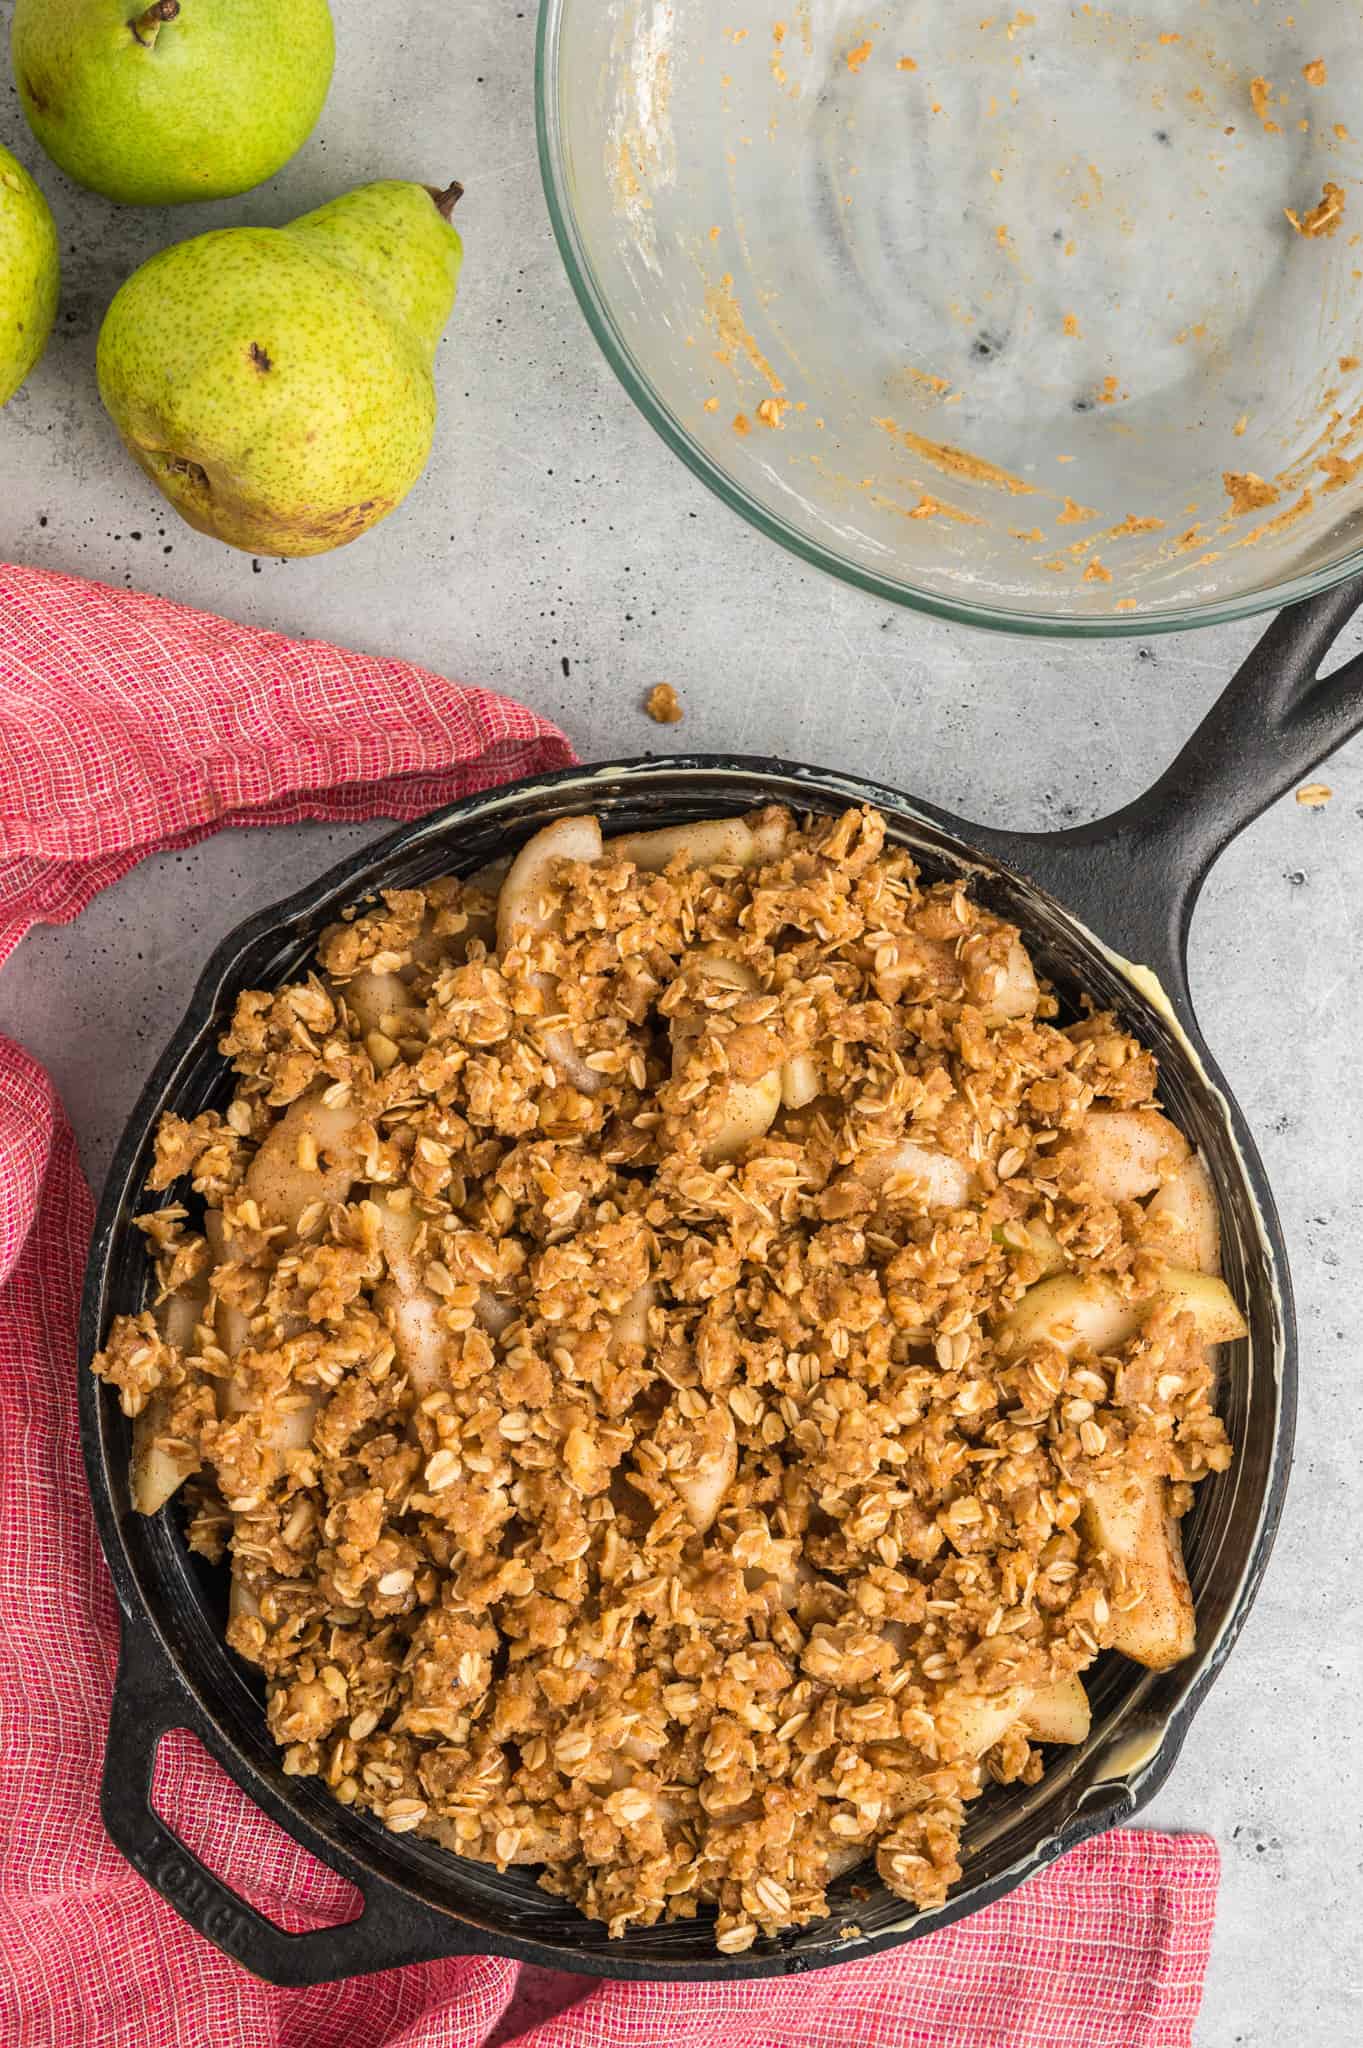 brown sugar oat crumble mixture on top of pear slices in a skillet